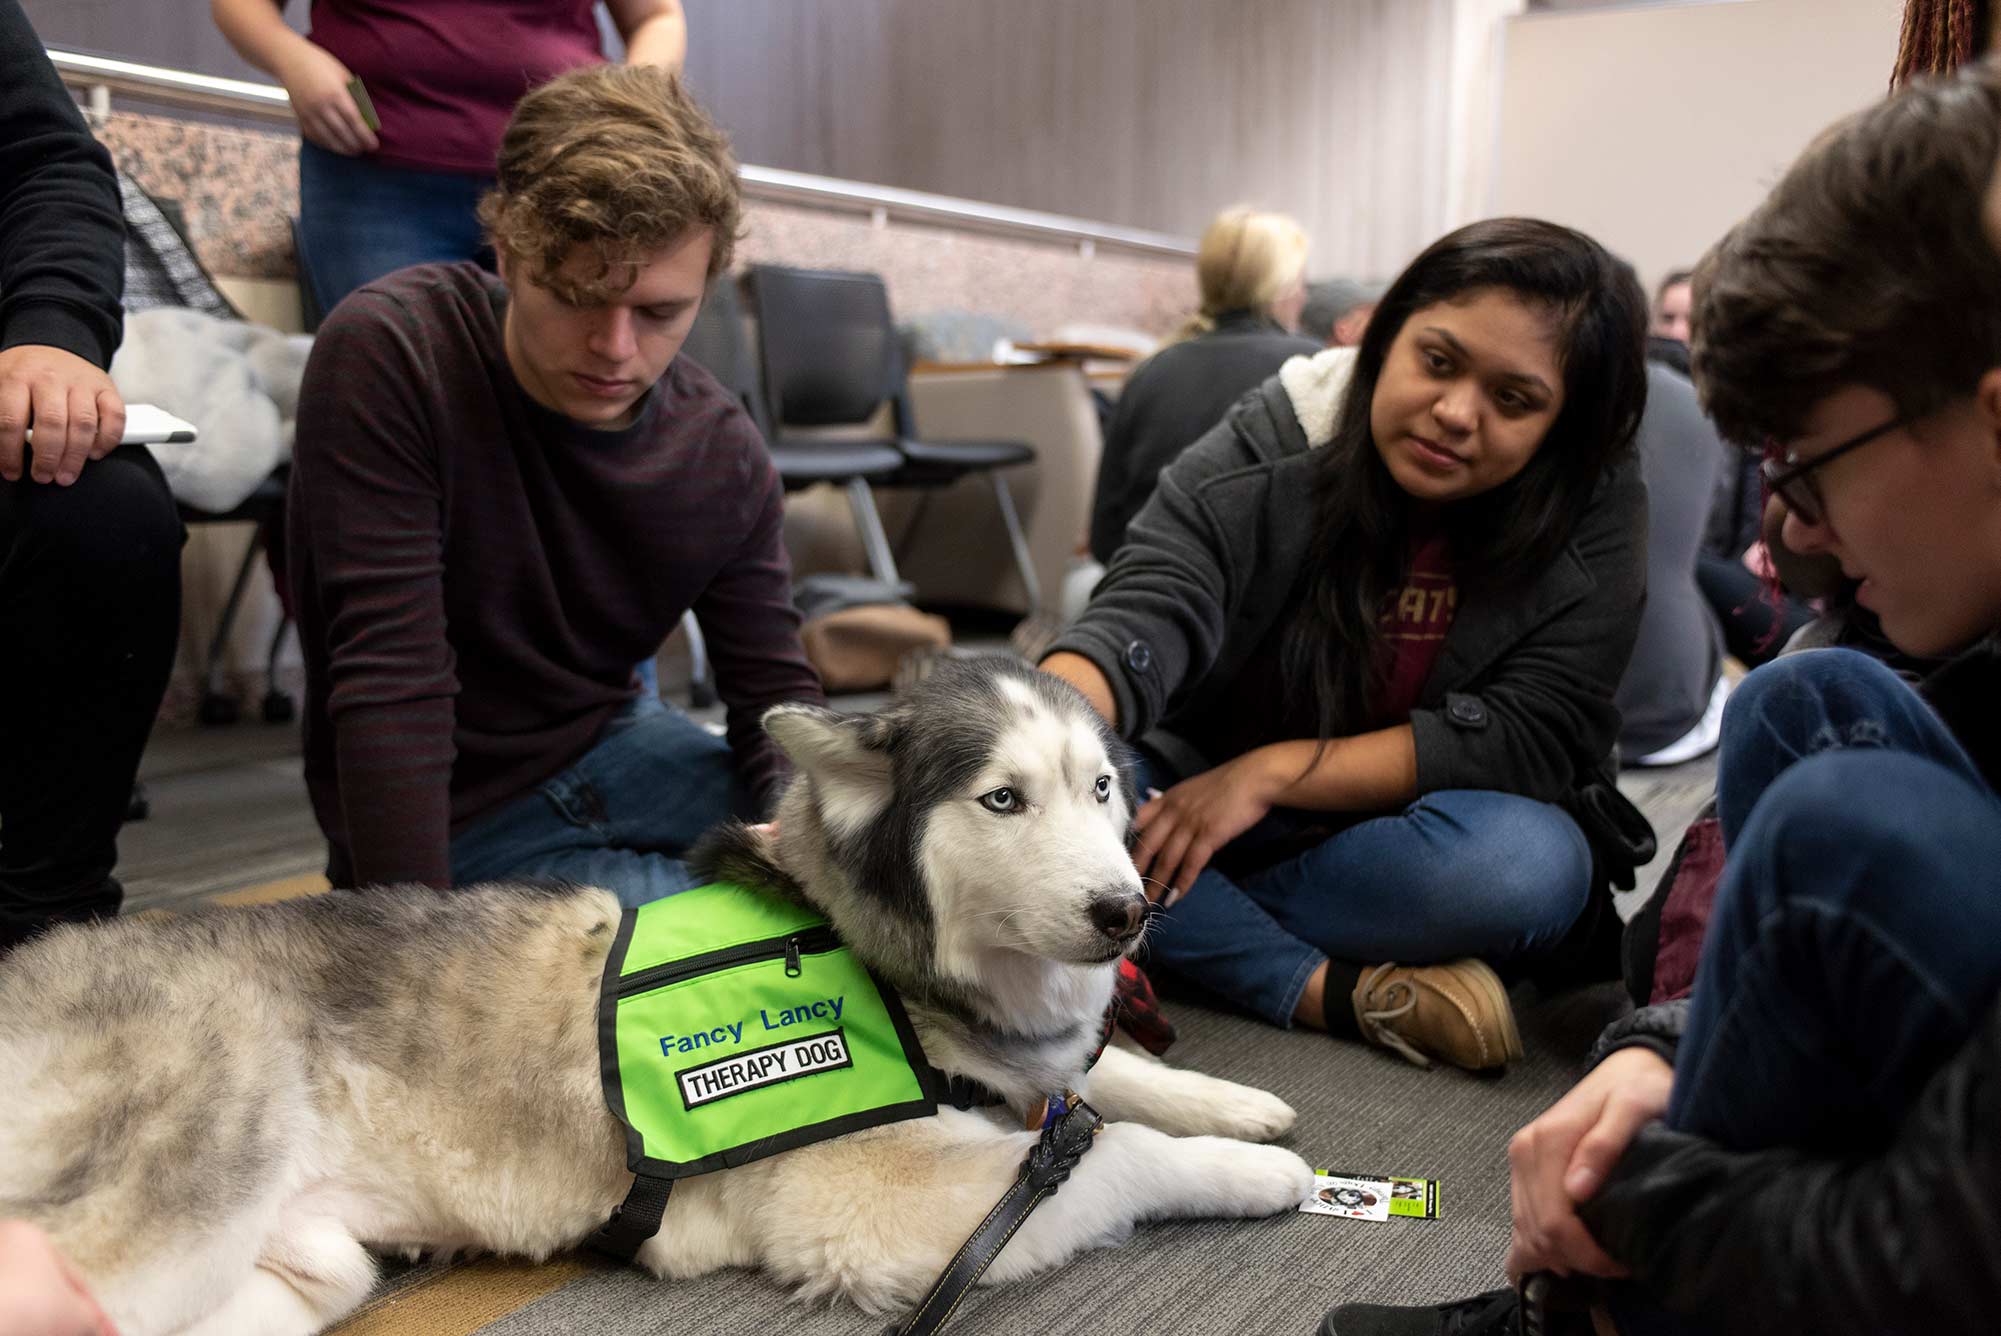 three students pet a husky therapy dog wearing a bright yellow vest